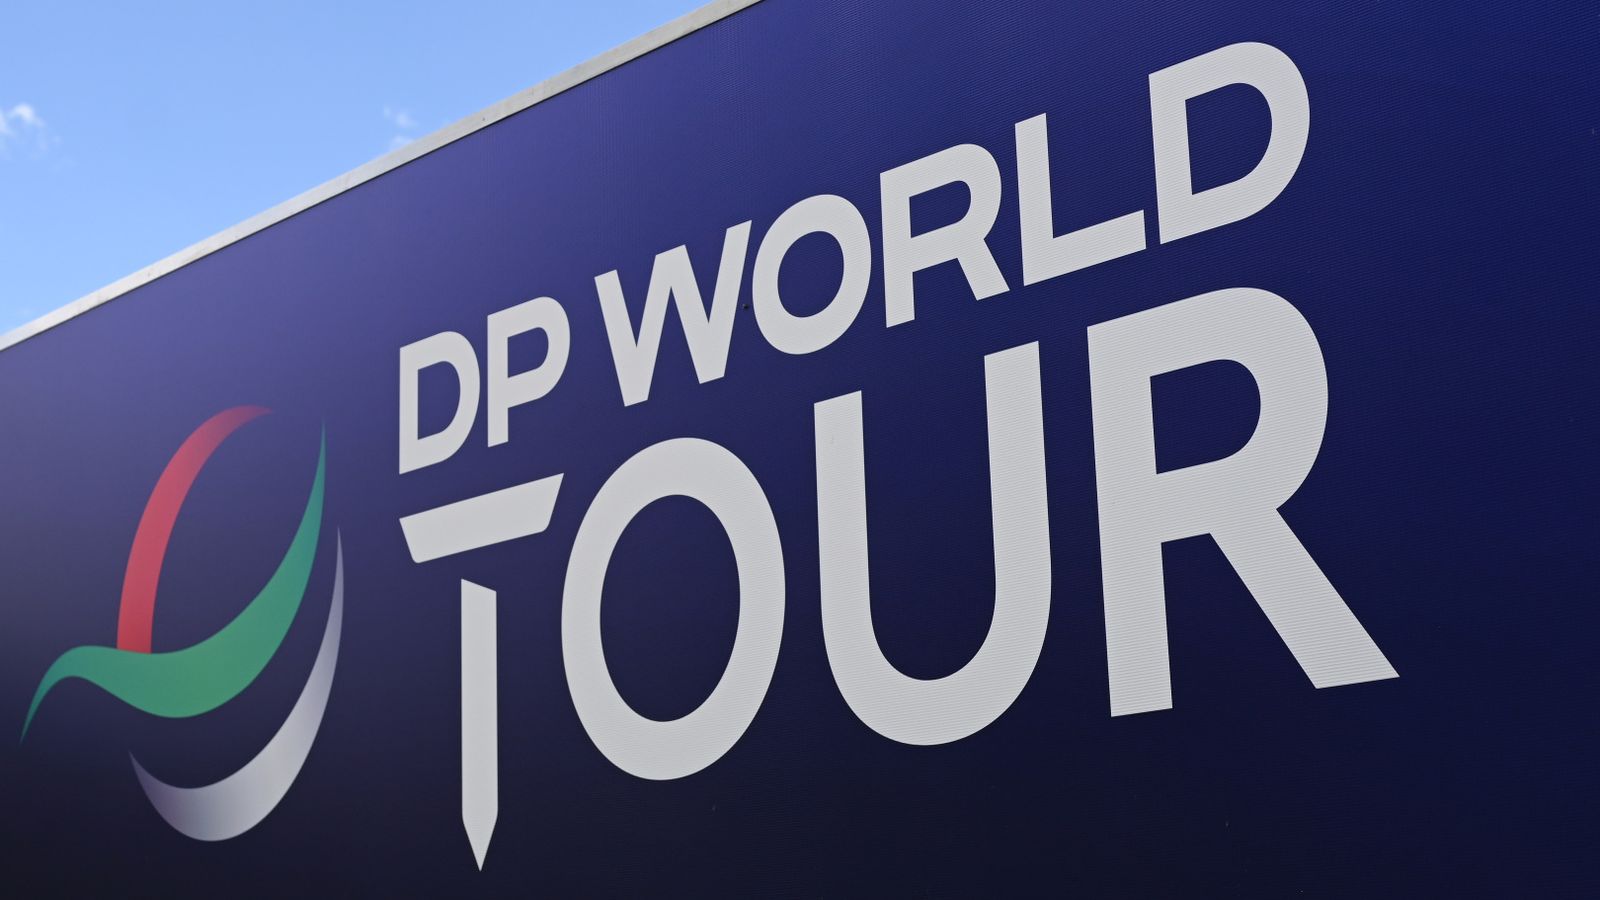 DP World Tour to host event in Japan for first time with inaugural ISPS